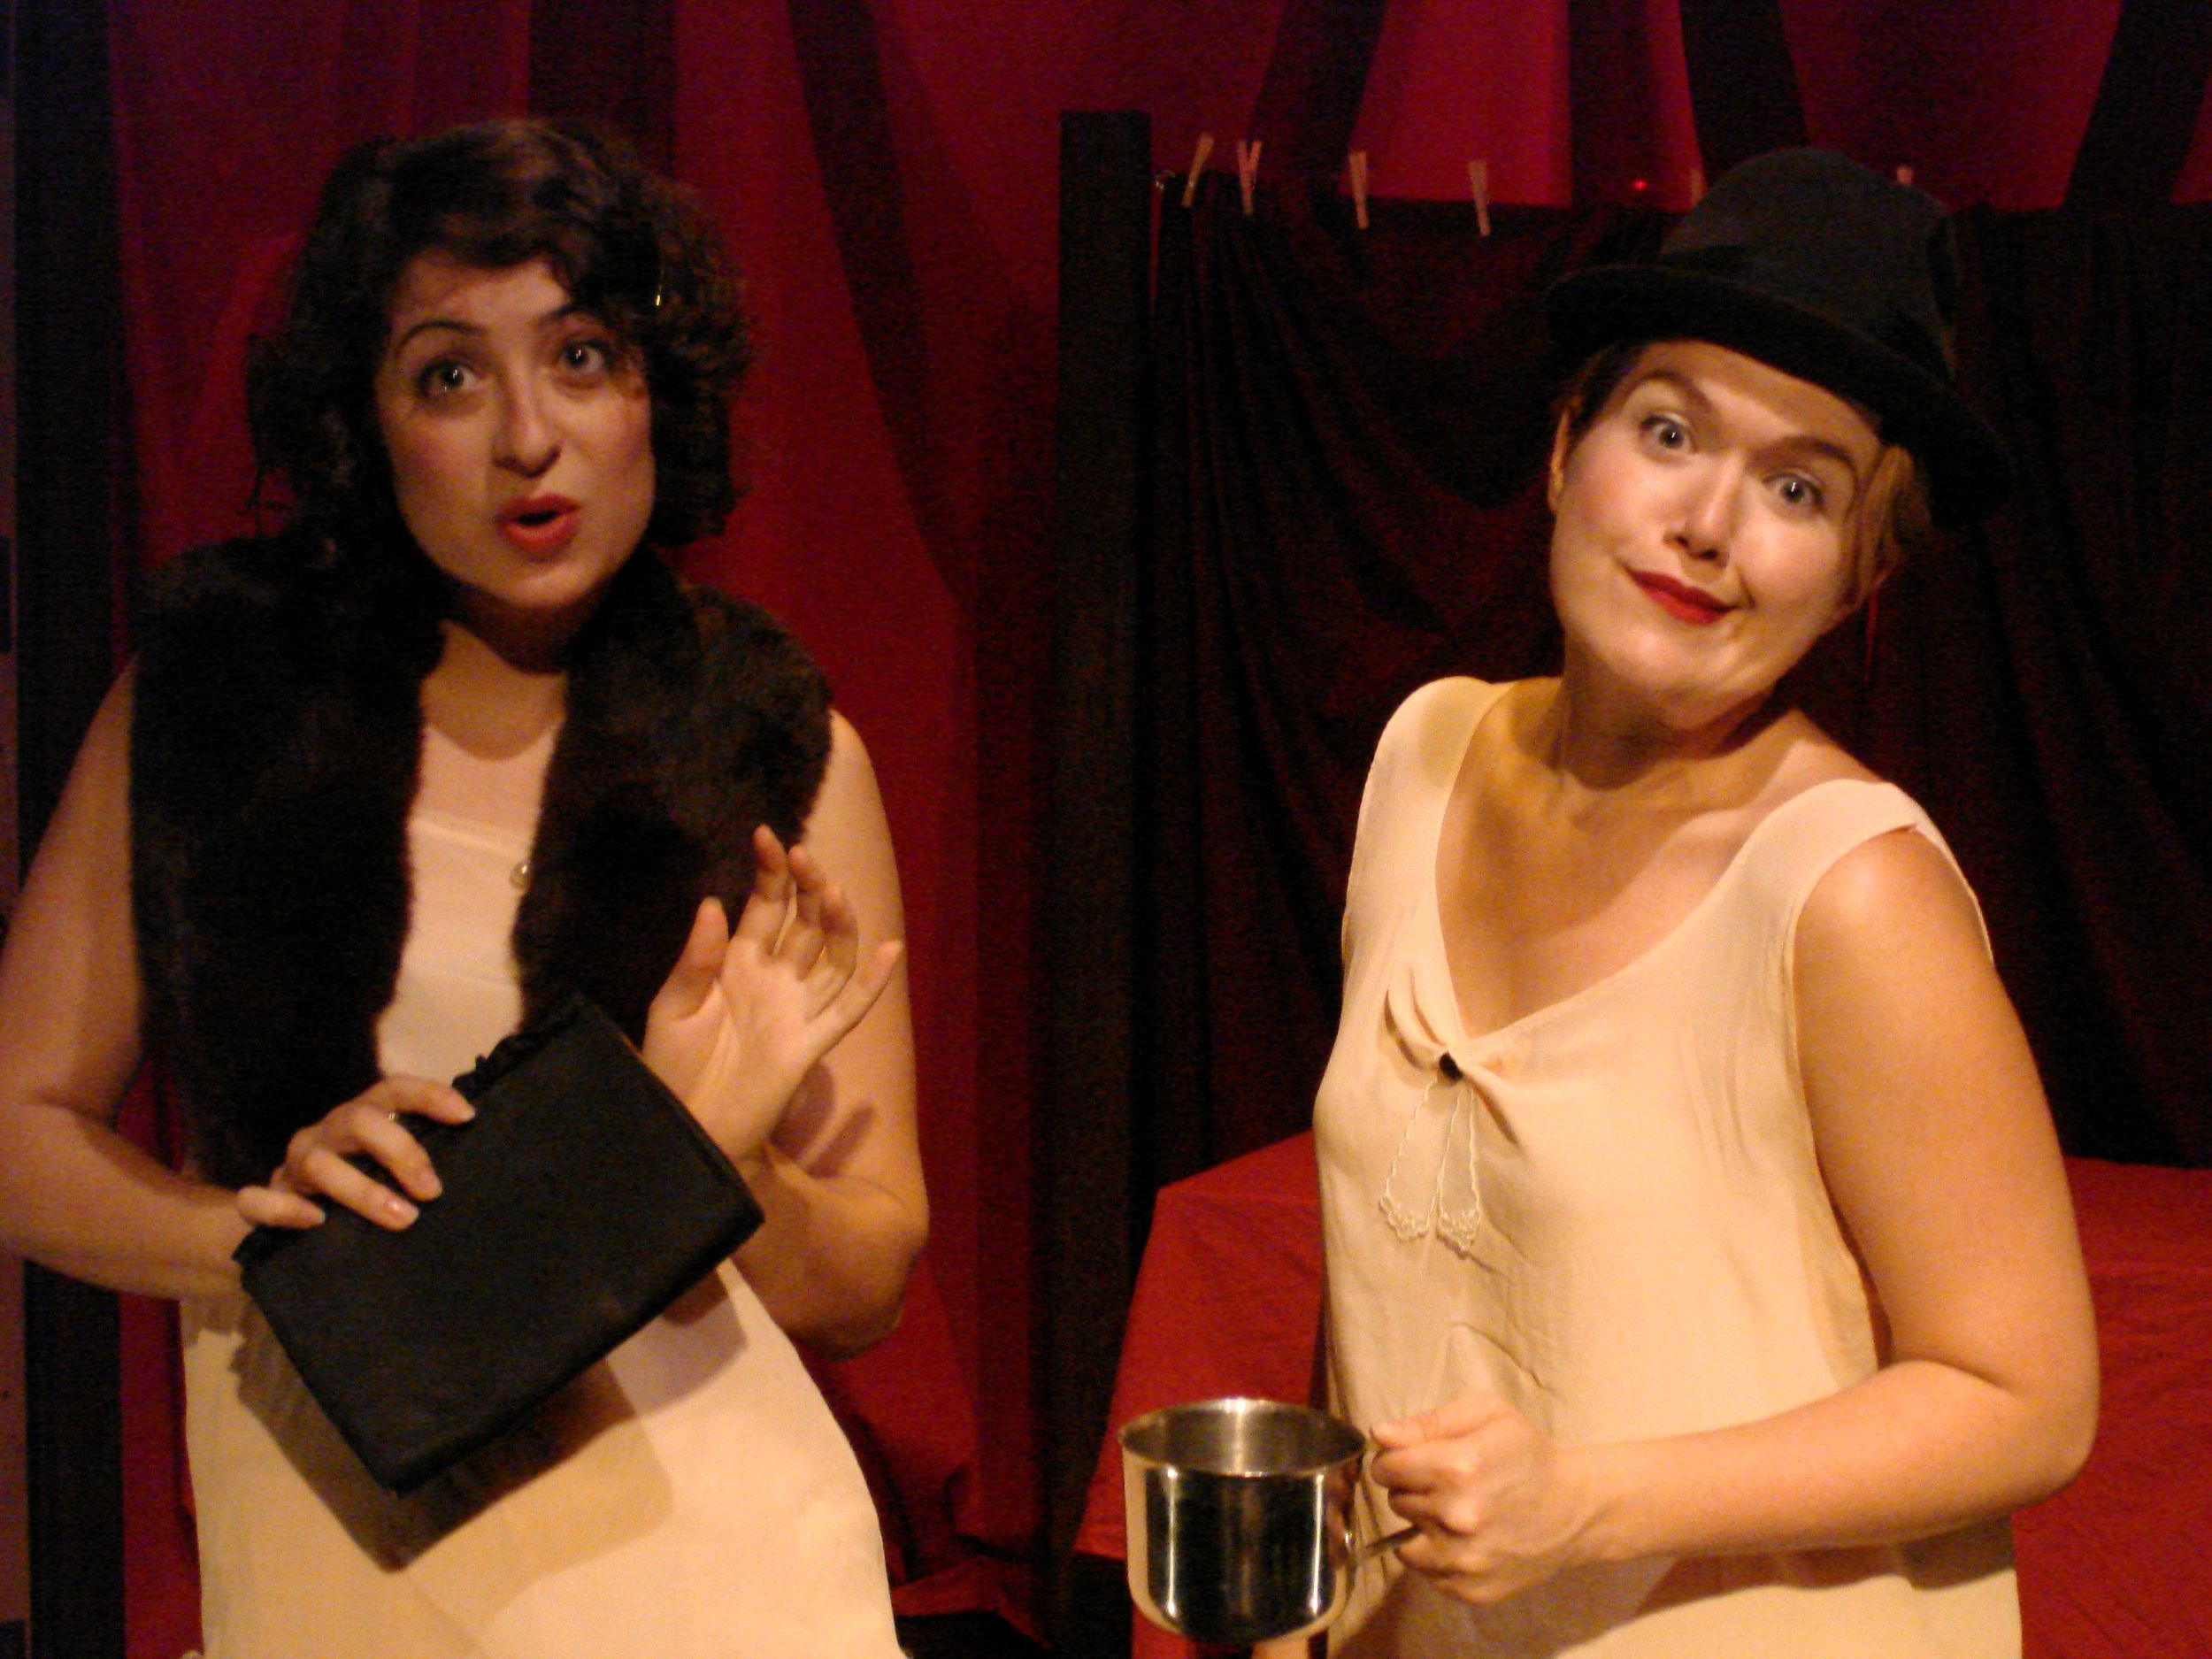 Desdemona: A Play About a Handkerchief by Paula Vogel, The Mill 2007